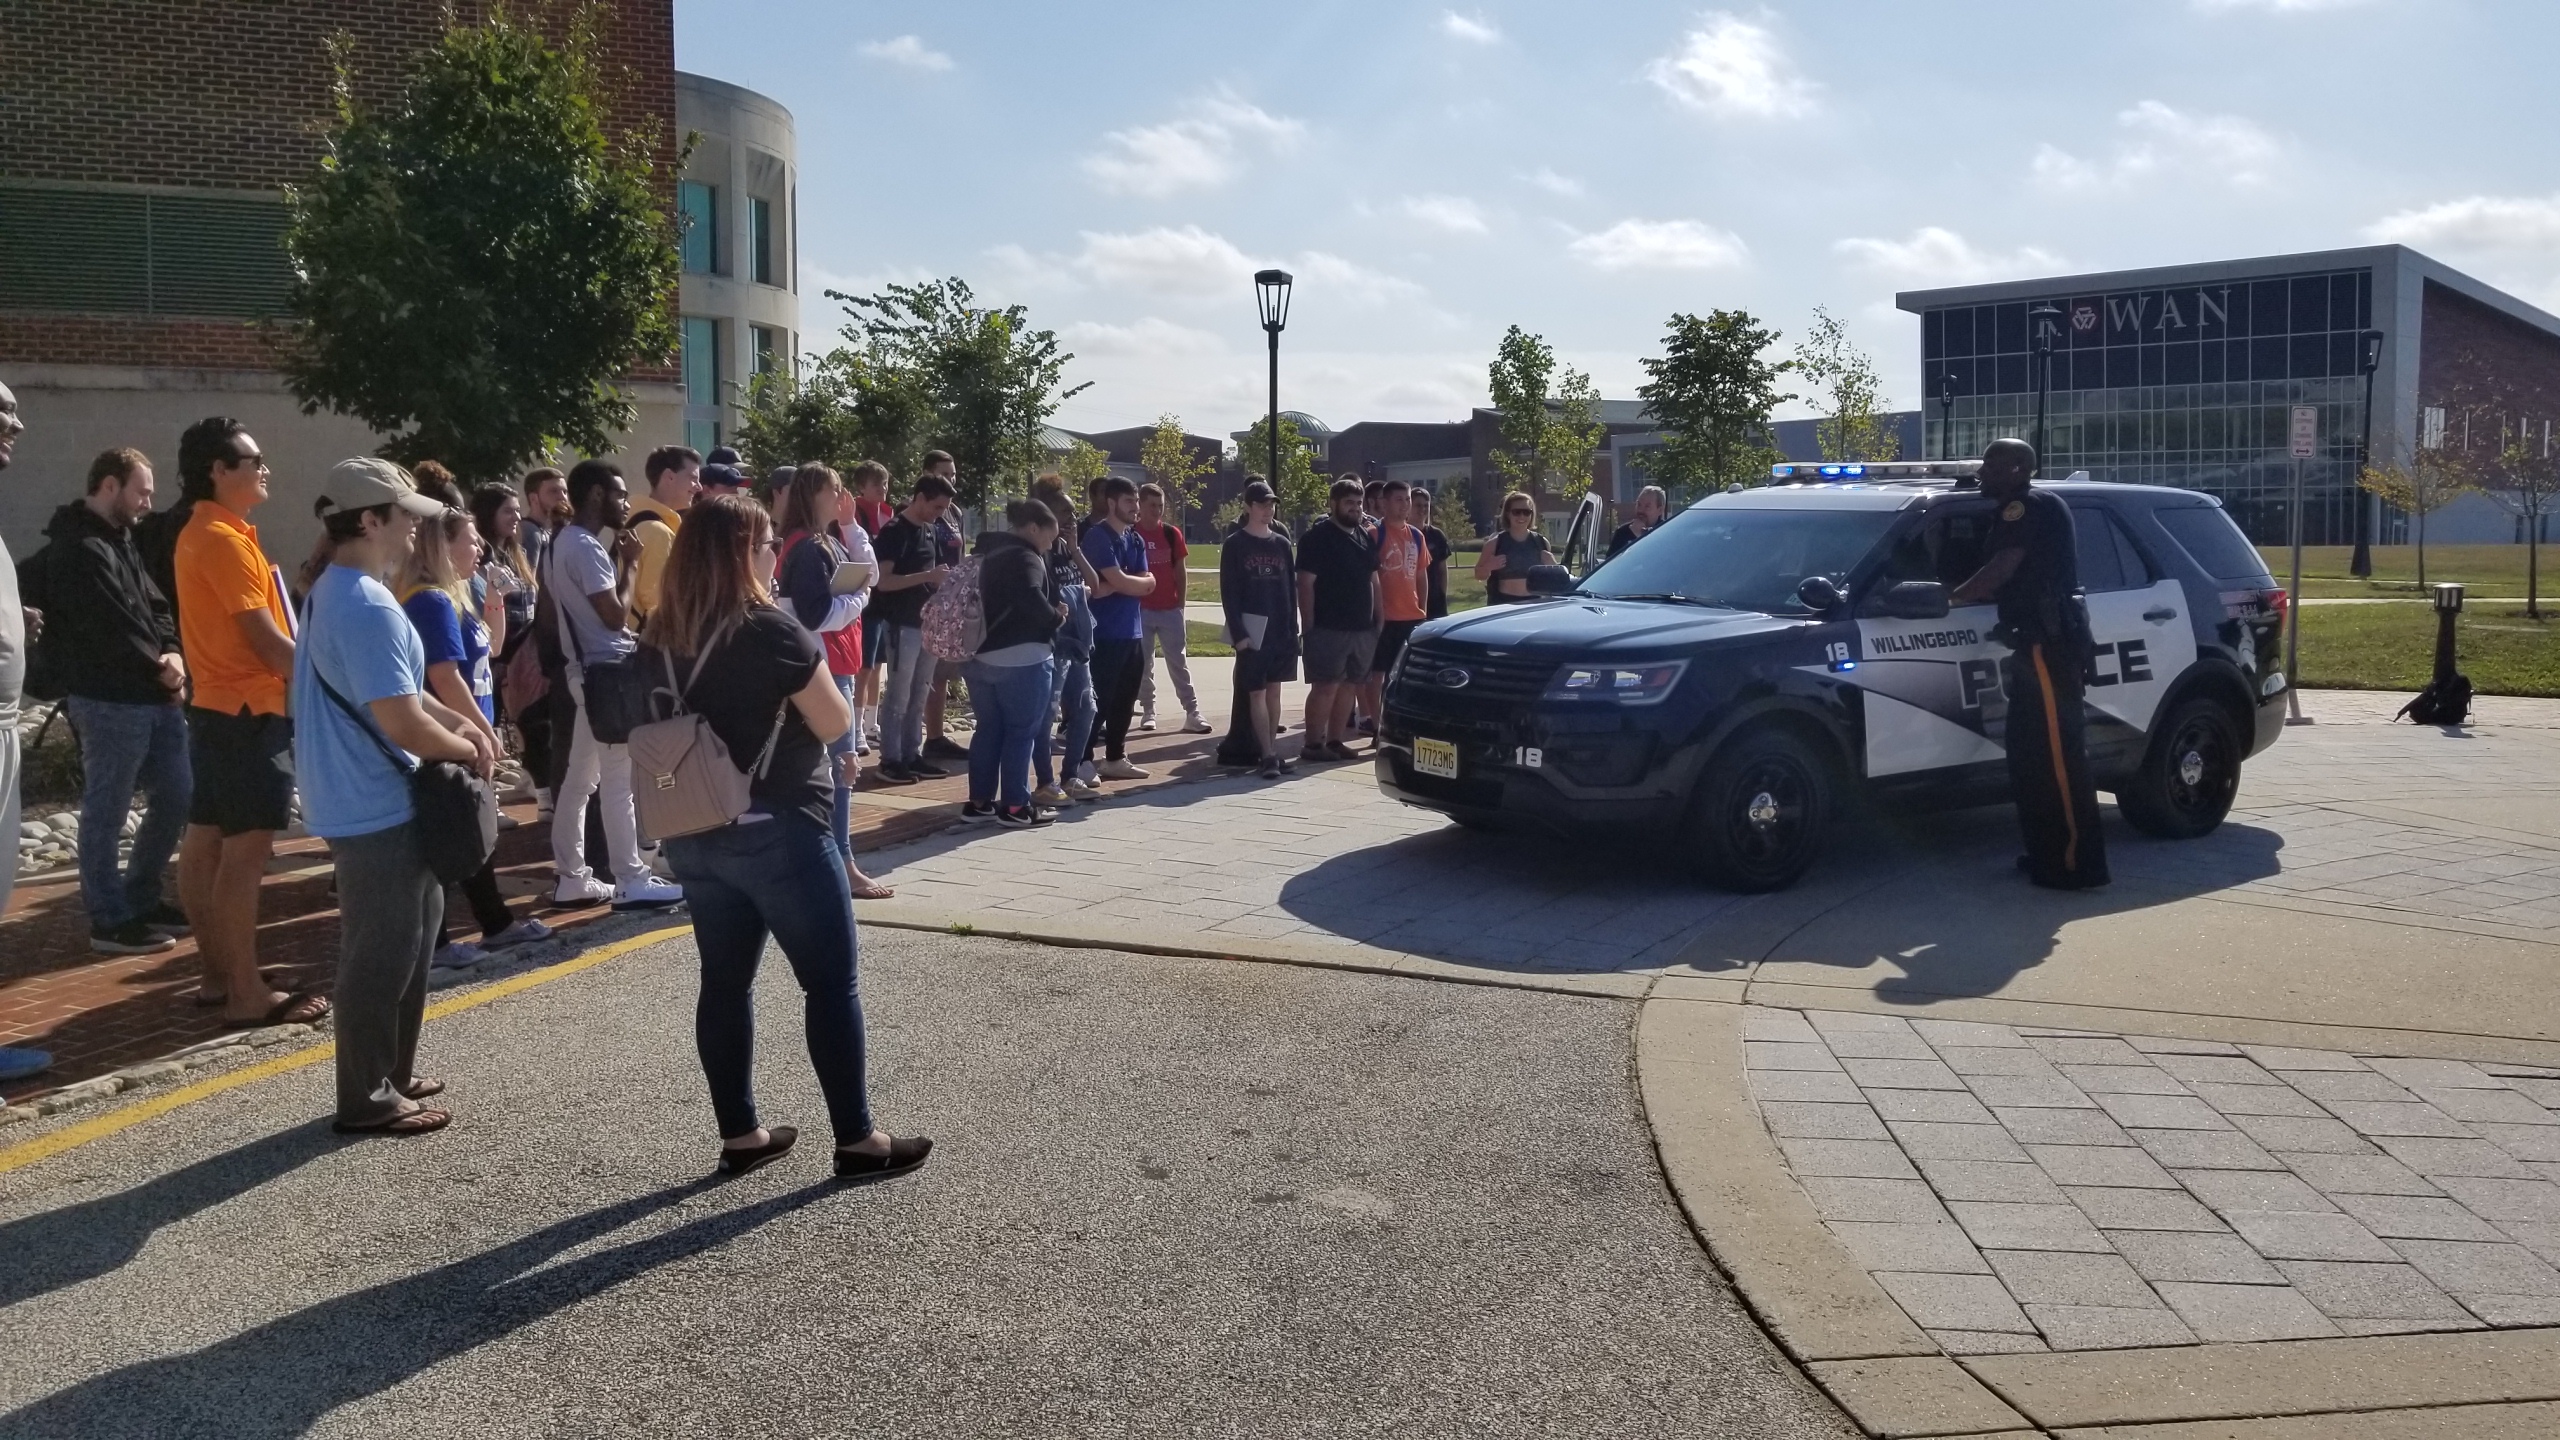 RCBC students gathered outside around Mount Laurel police officer and vehicle